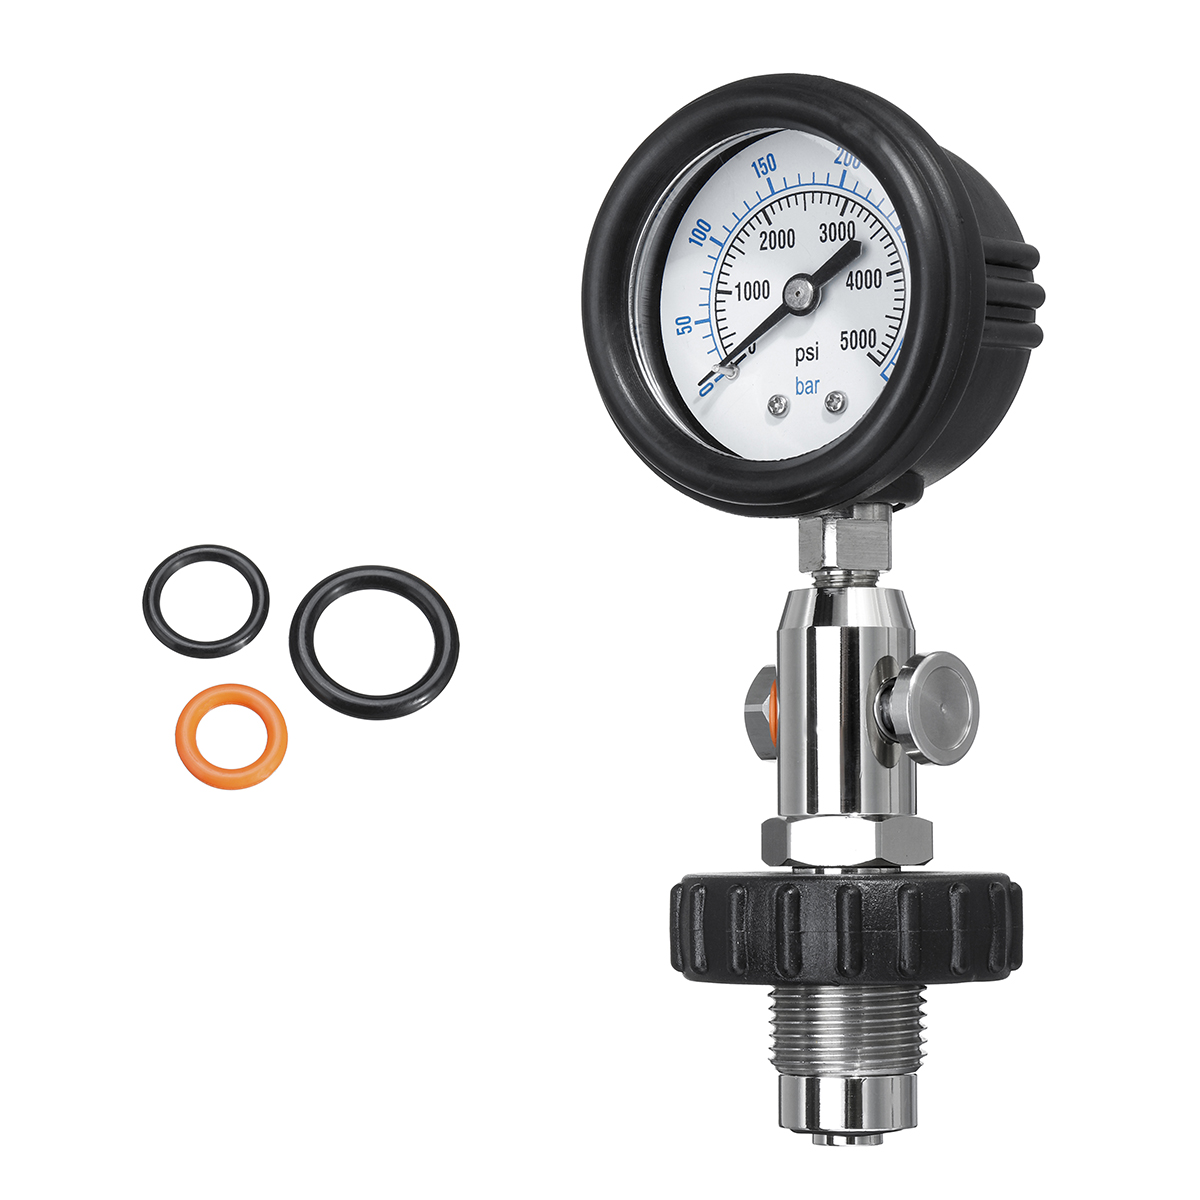 350-BAR-Axial-Hydraulic-Pressure-Gauge-Test-40MPa-6000PSI-Stainless-Steel-Indicator-1649890-1